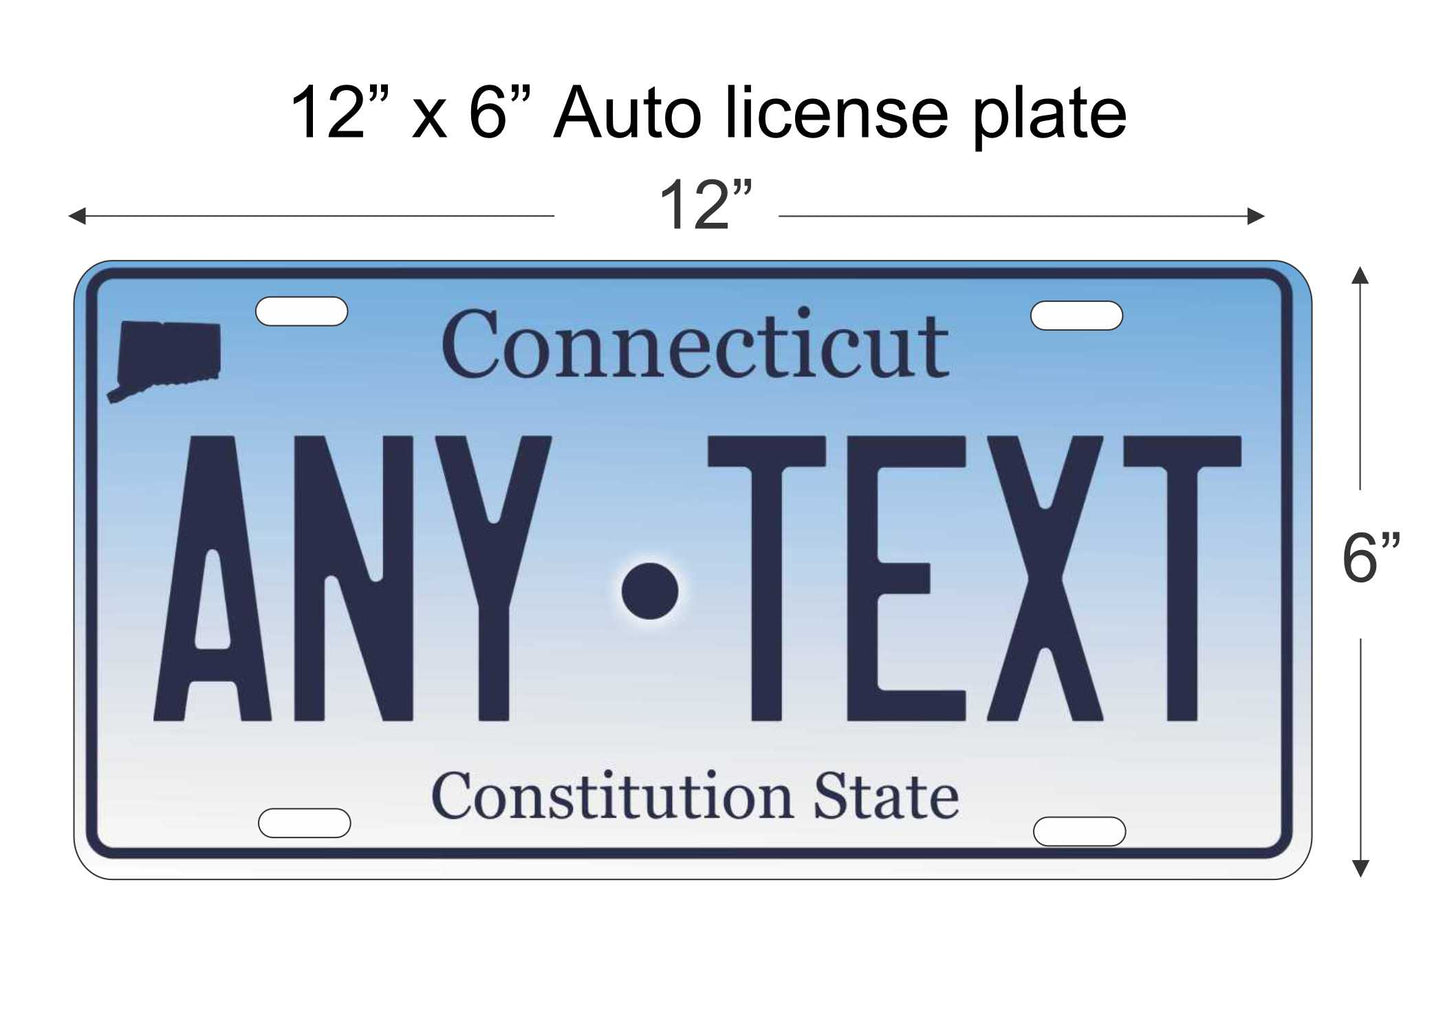 Connecticut state personalized novelty vanity front license plate replica decorative aluminum sign car tag